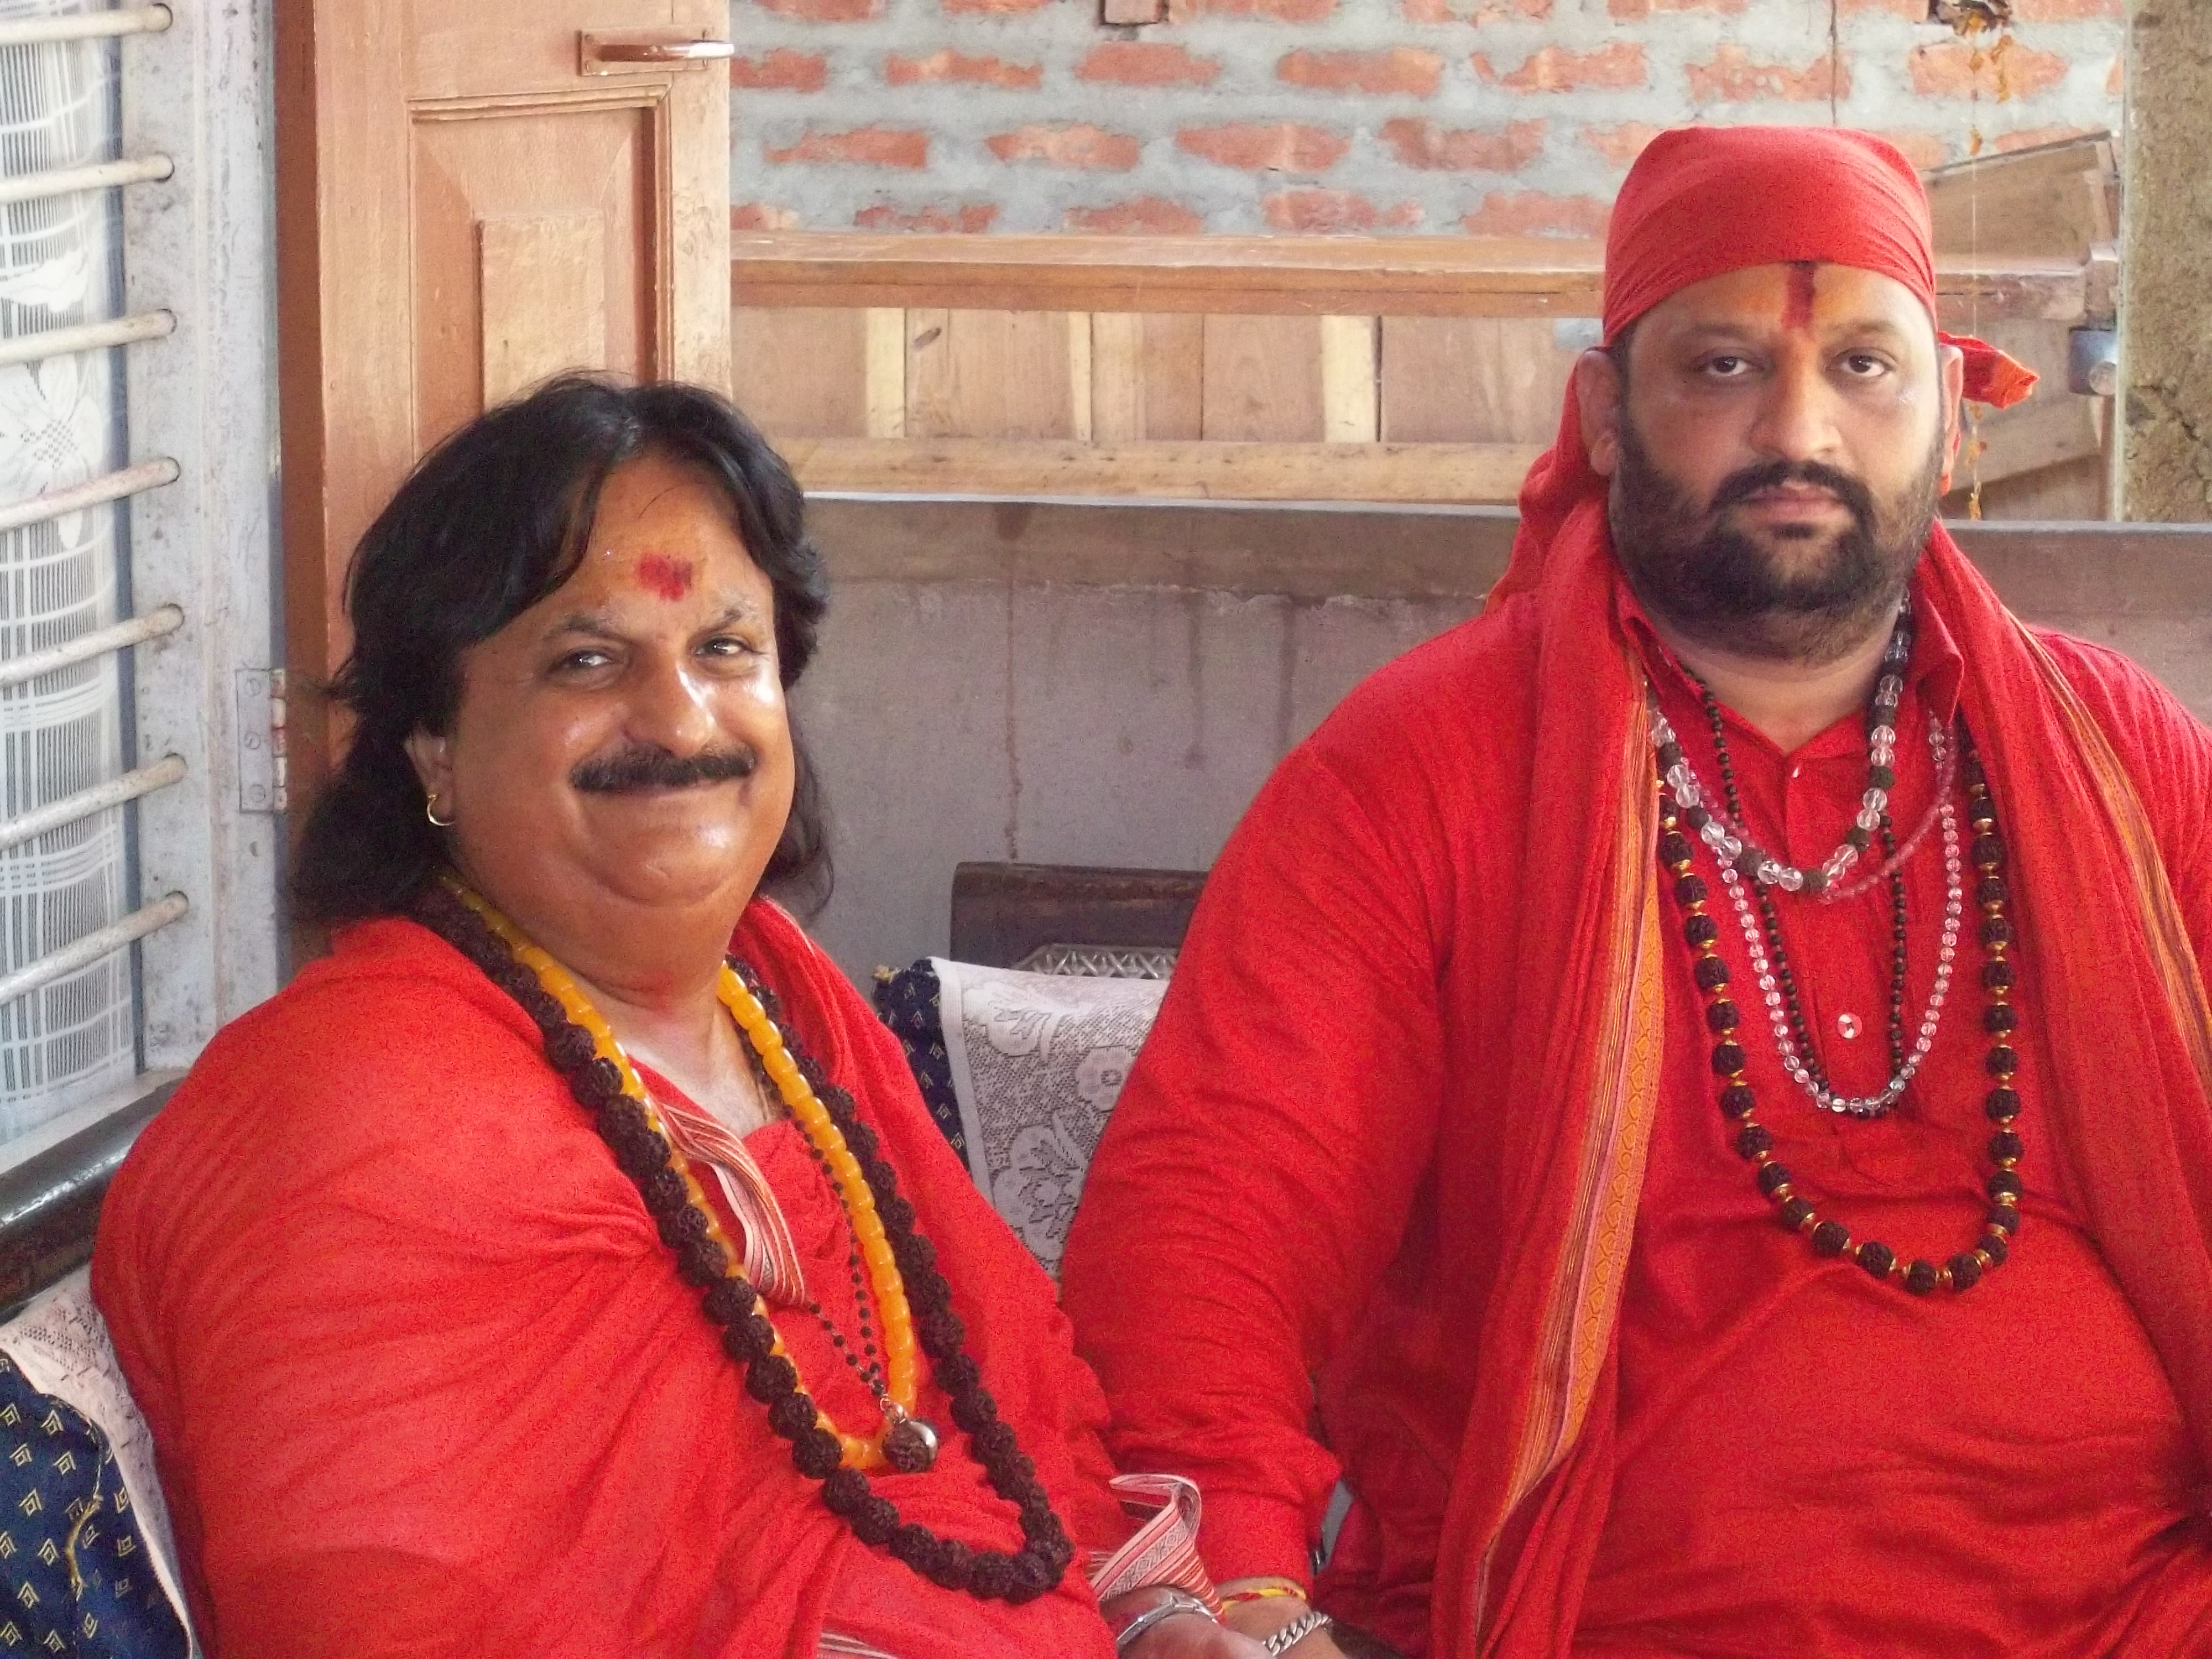 lalbaba with his deciple Rajeswranand in mansha puja